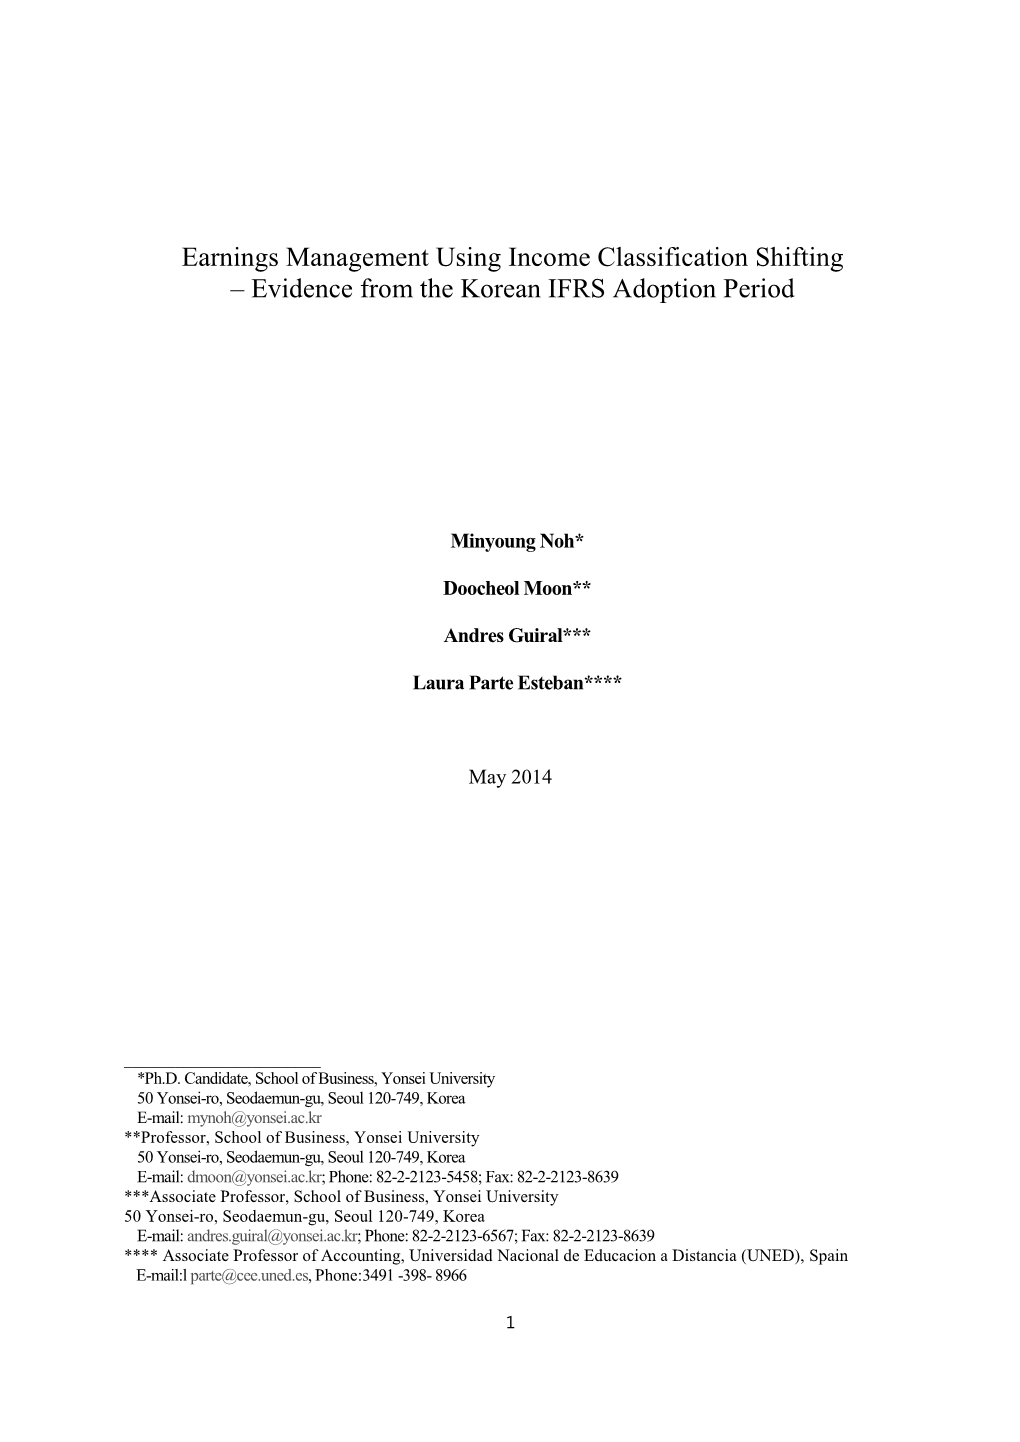 Earnings Management Using Income Classification Shifting – Evidence from the Korean IFRS Adoption Period